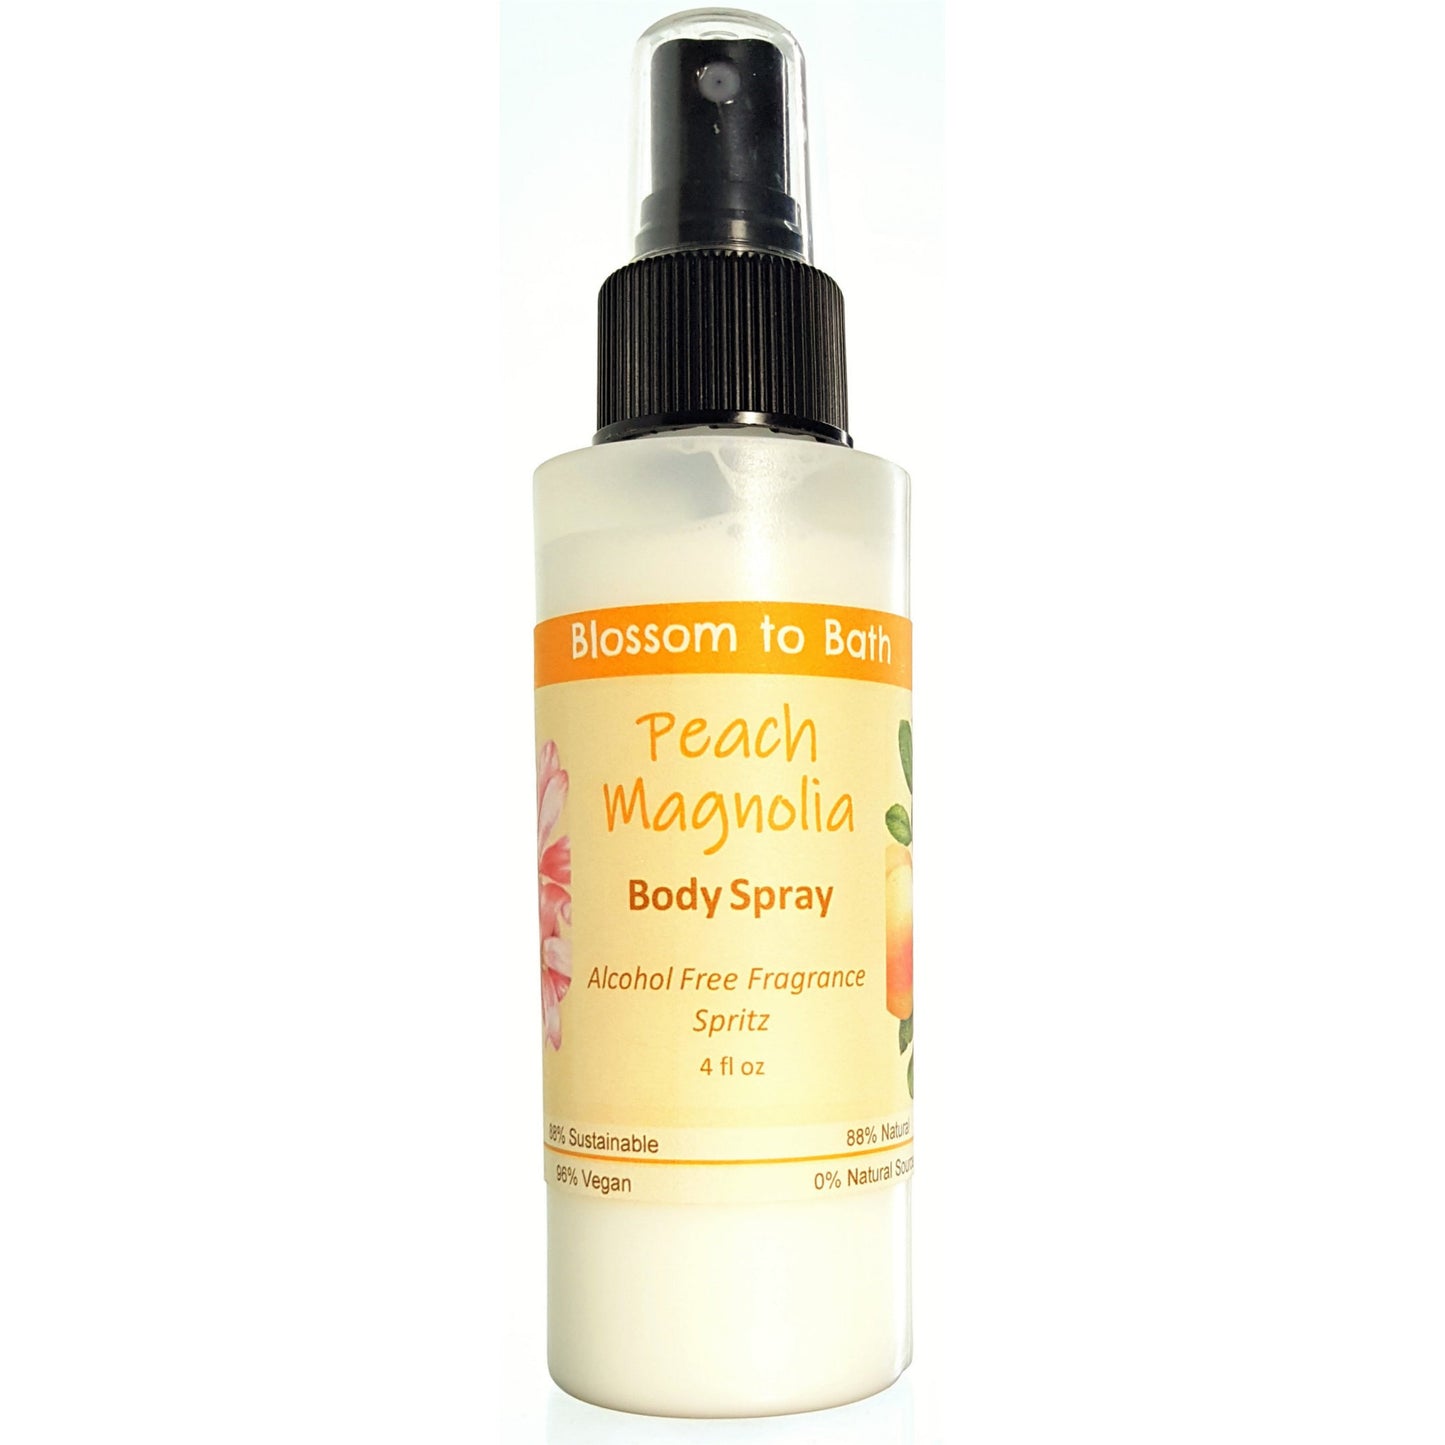 Buy Blossom to Bath Peach Magnolia Body Spray from Flowersong Soap Studio.  Natural  freshening of skin, linens, or air  An intoxicating blend of peach, magnolia, and raspberry.